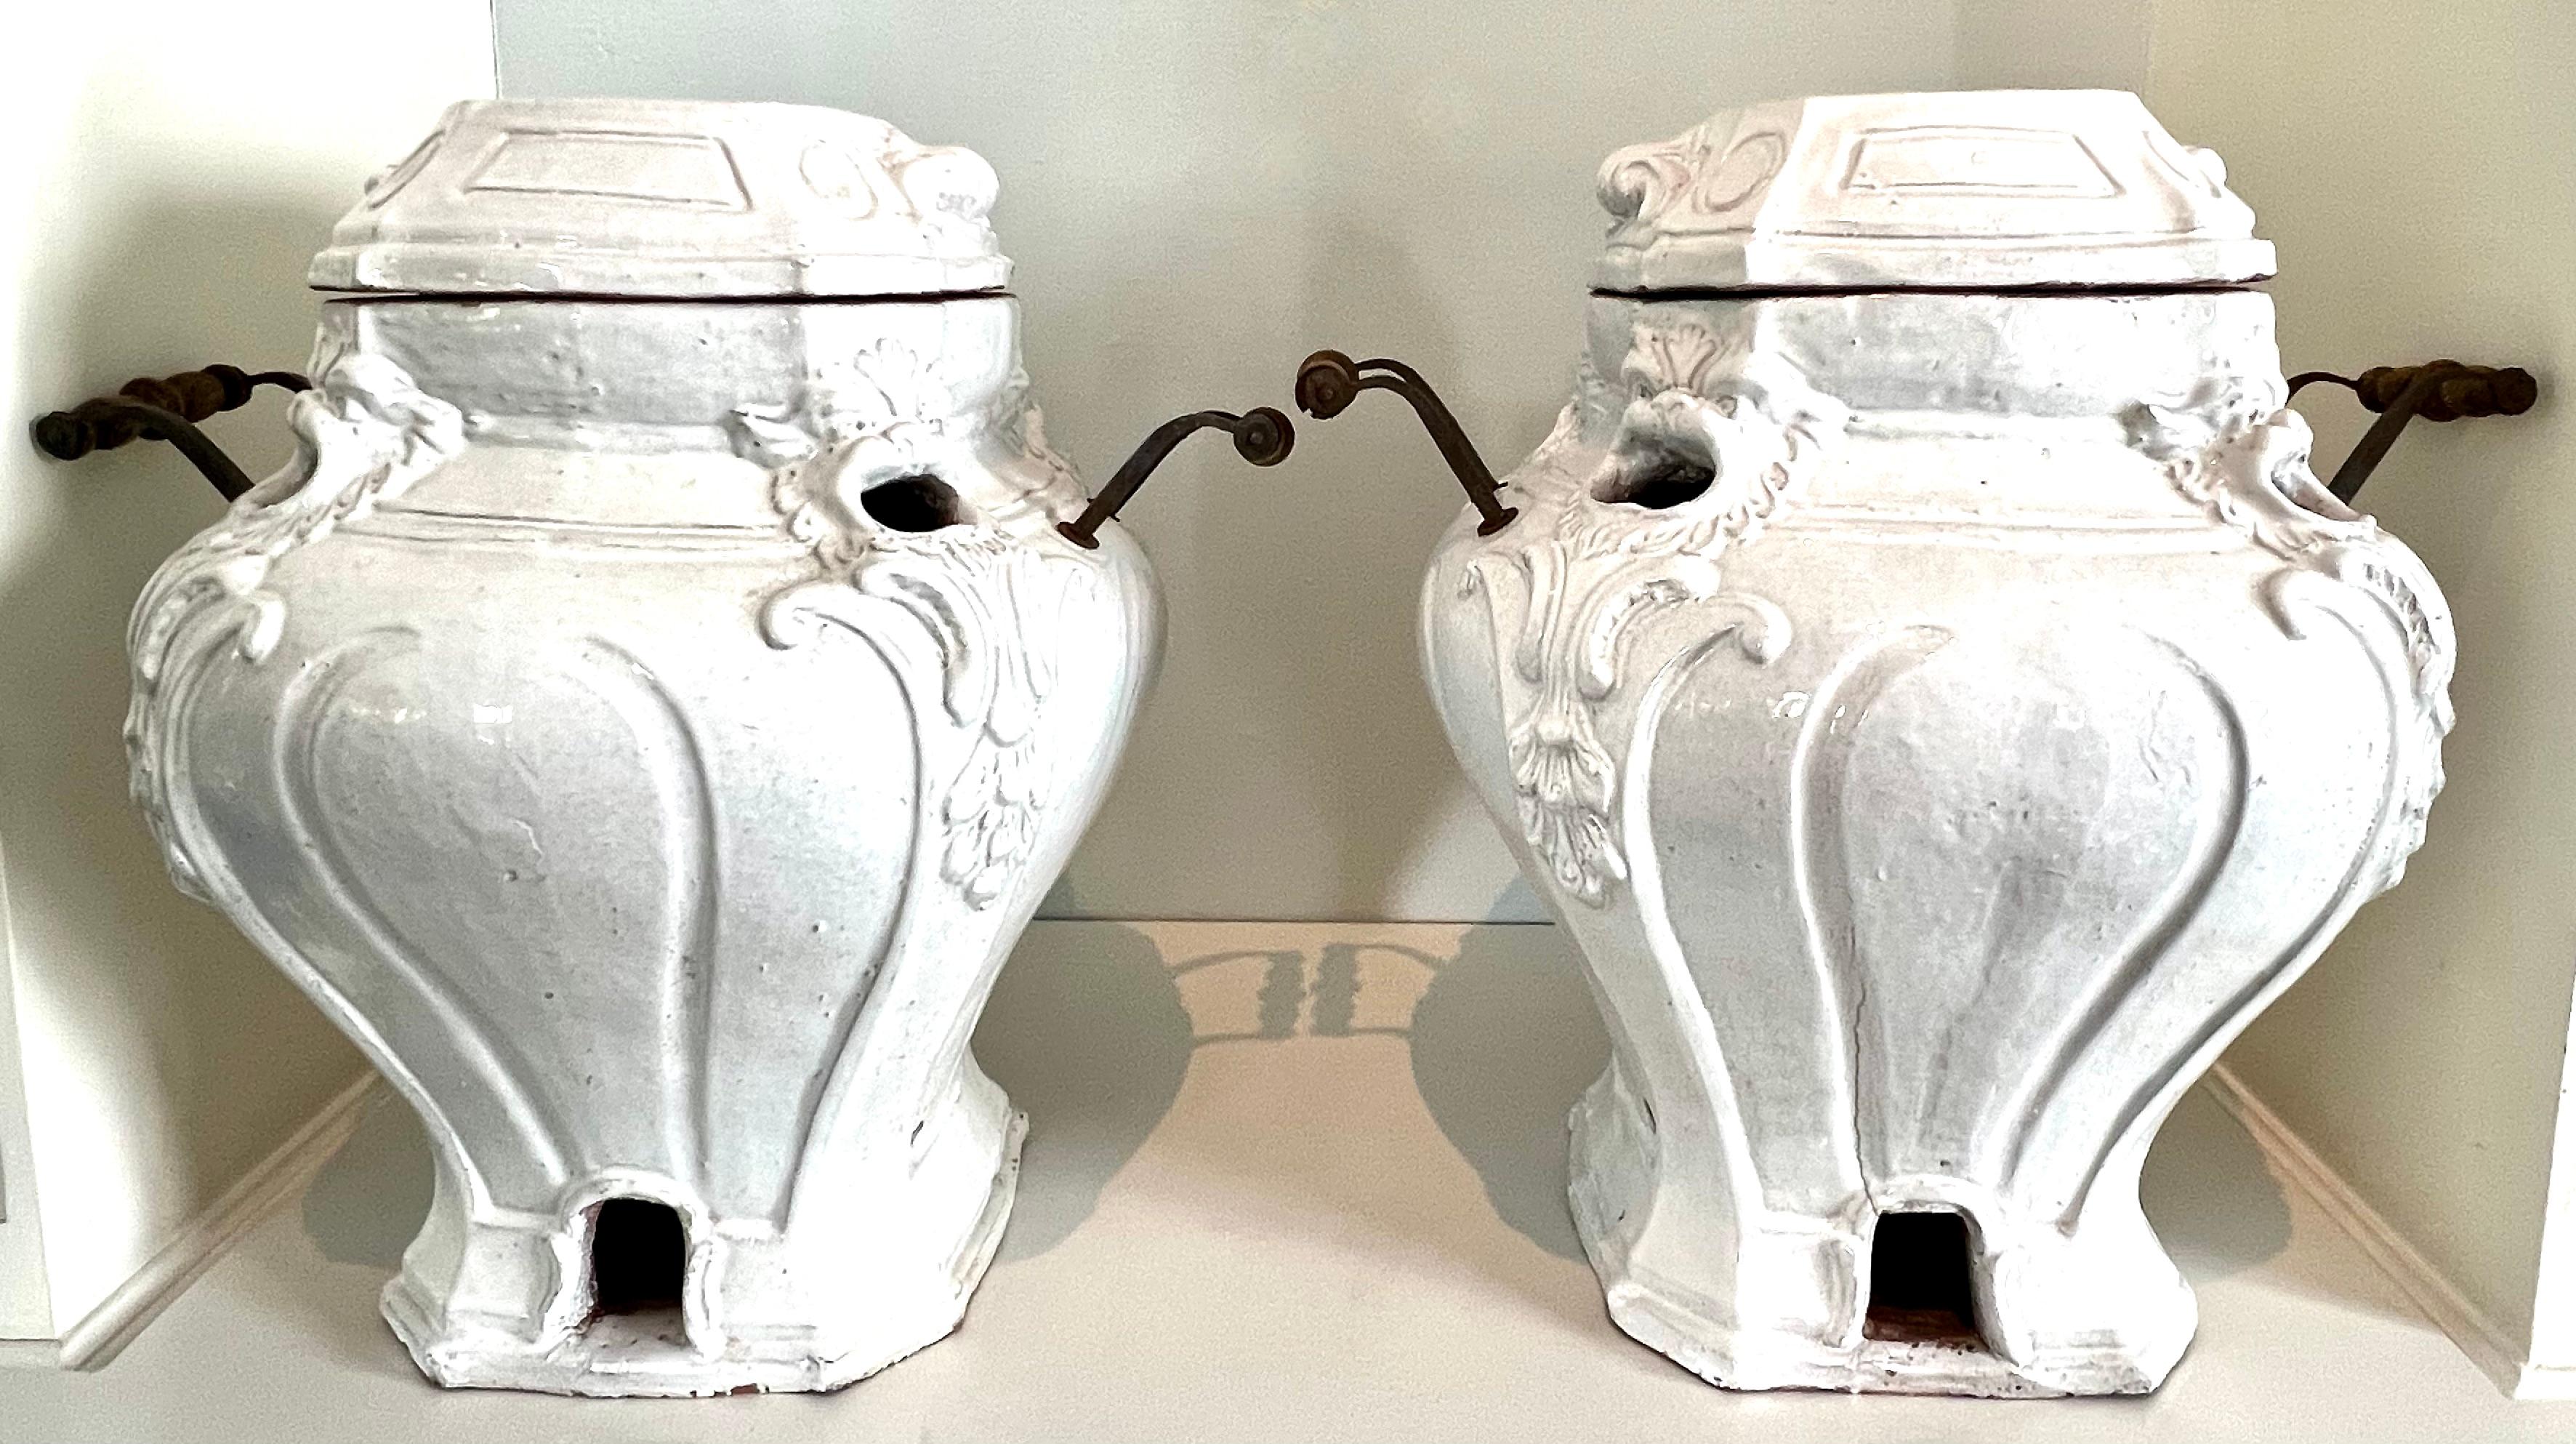 Pair of Glazed Terracotta Garden Urns or Jardinieres with Metal and Wood Handles For Sale 7